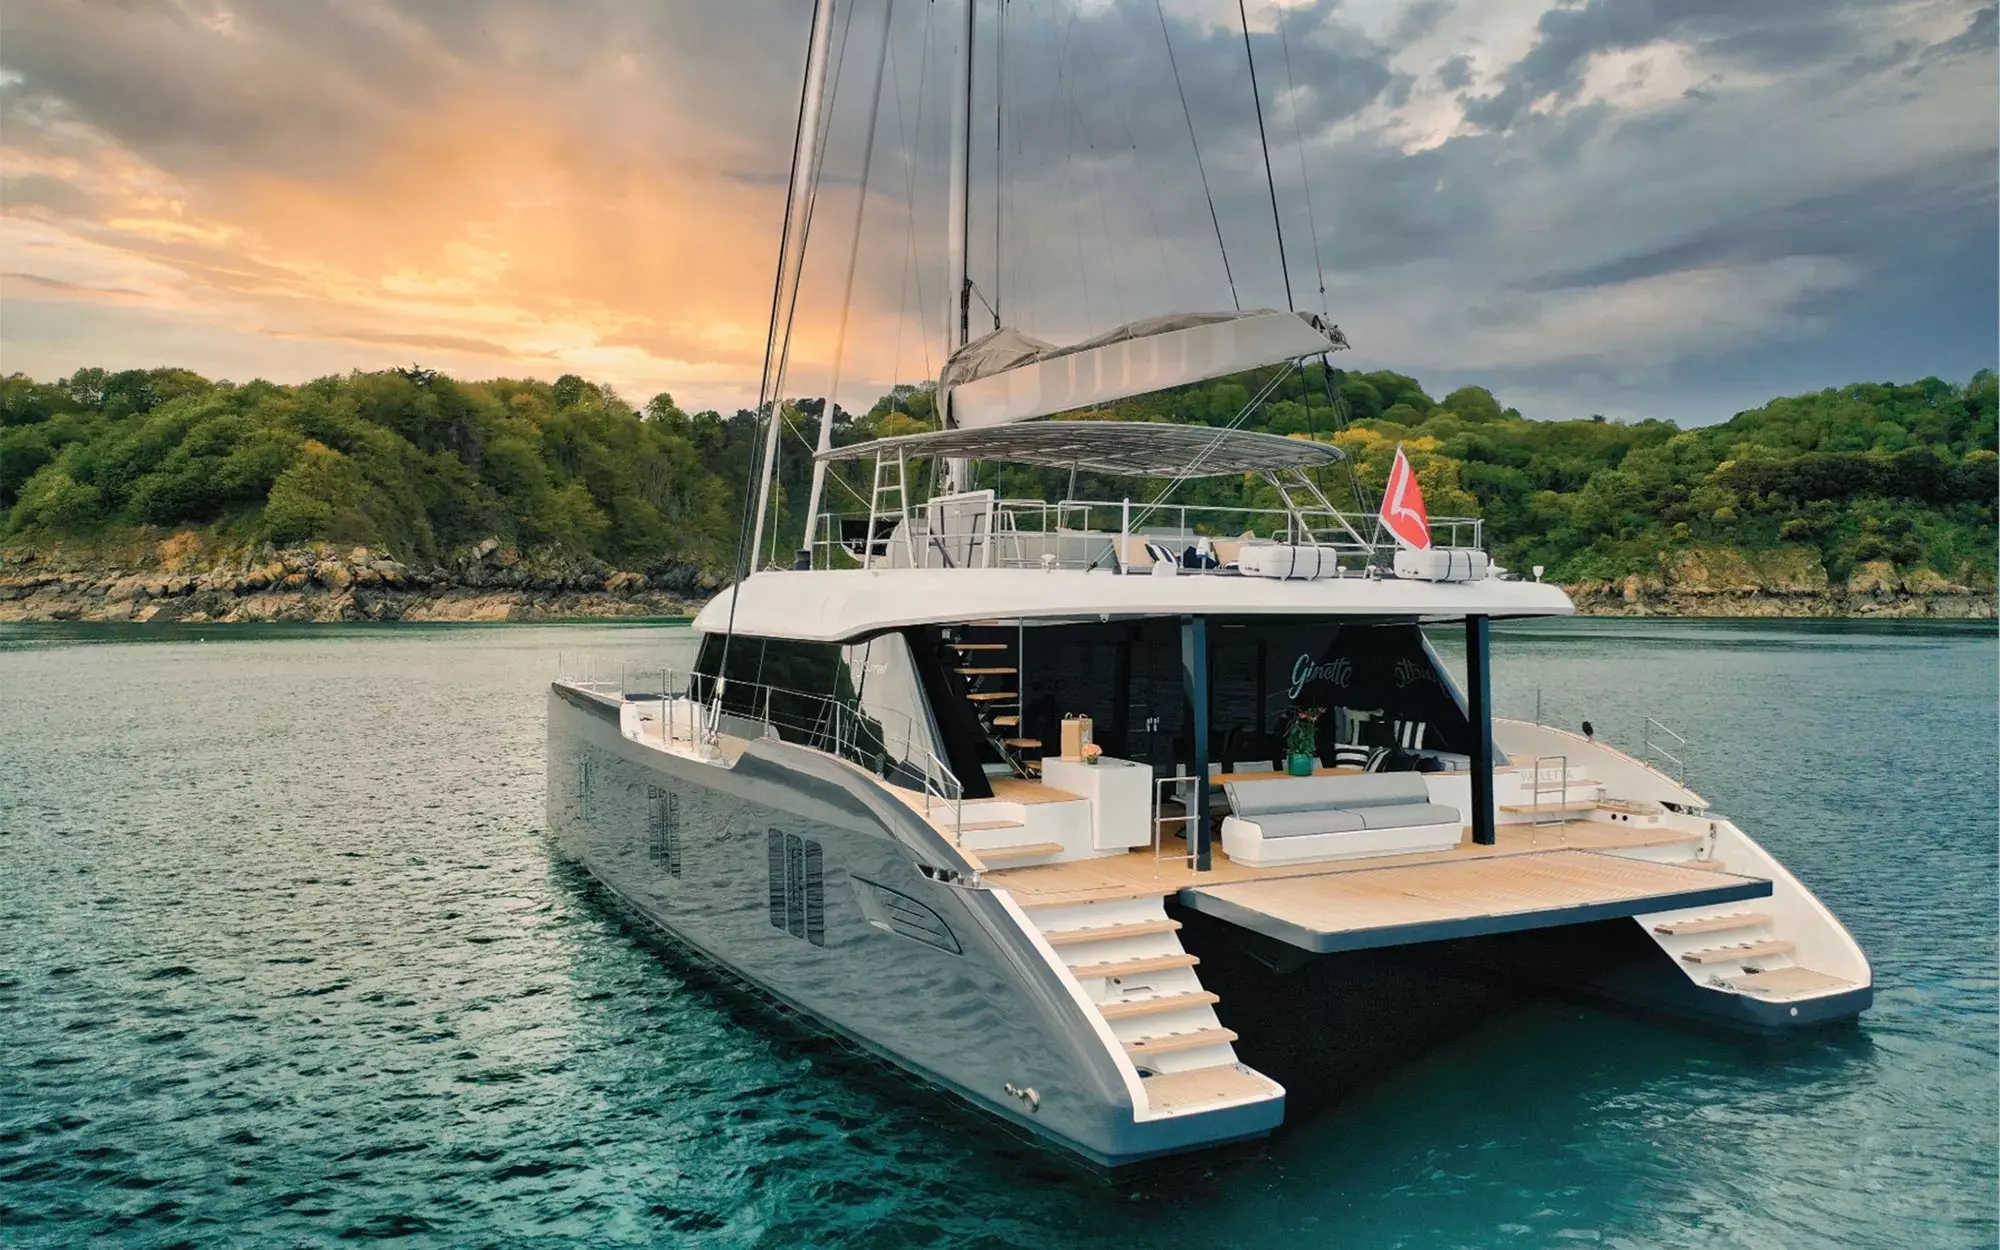 Ginette by Sunreef Yachts - Top rates for a Rental of a private Luxury Catamaran in New Zealand